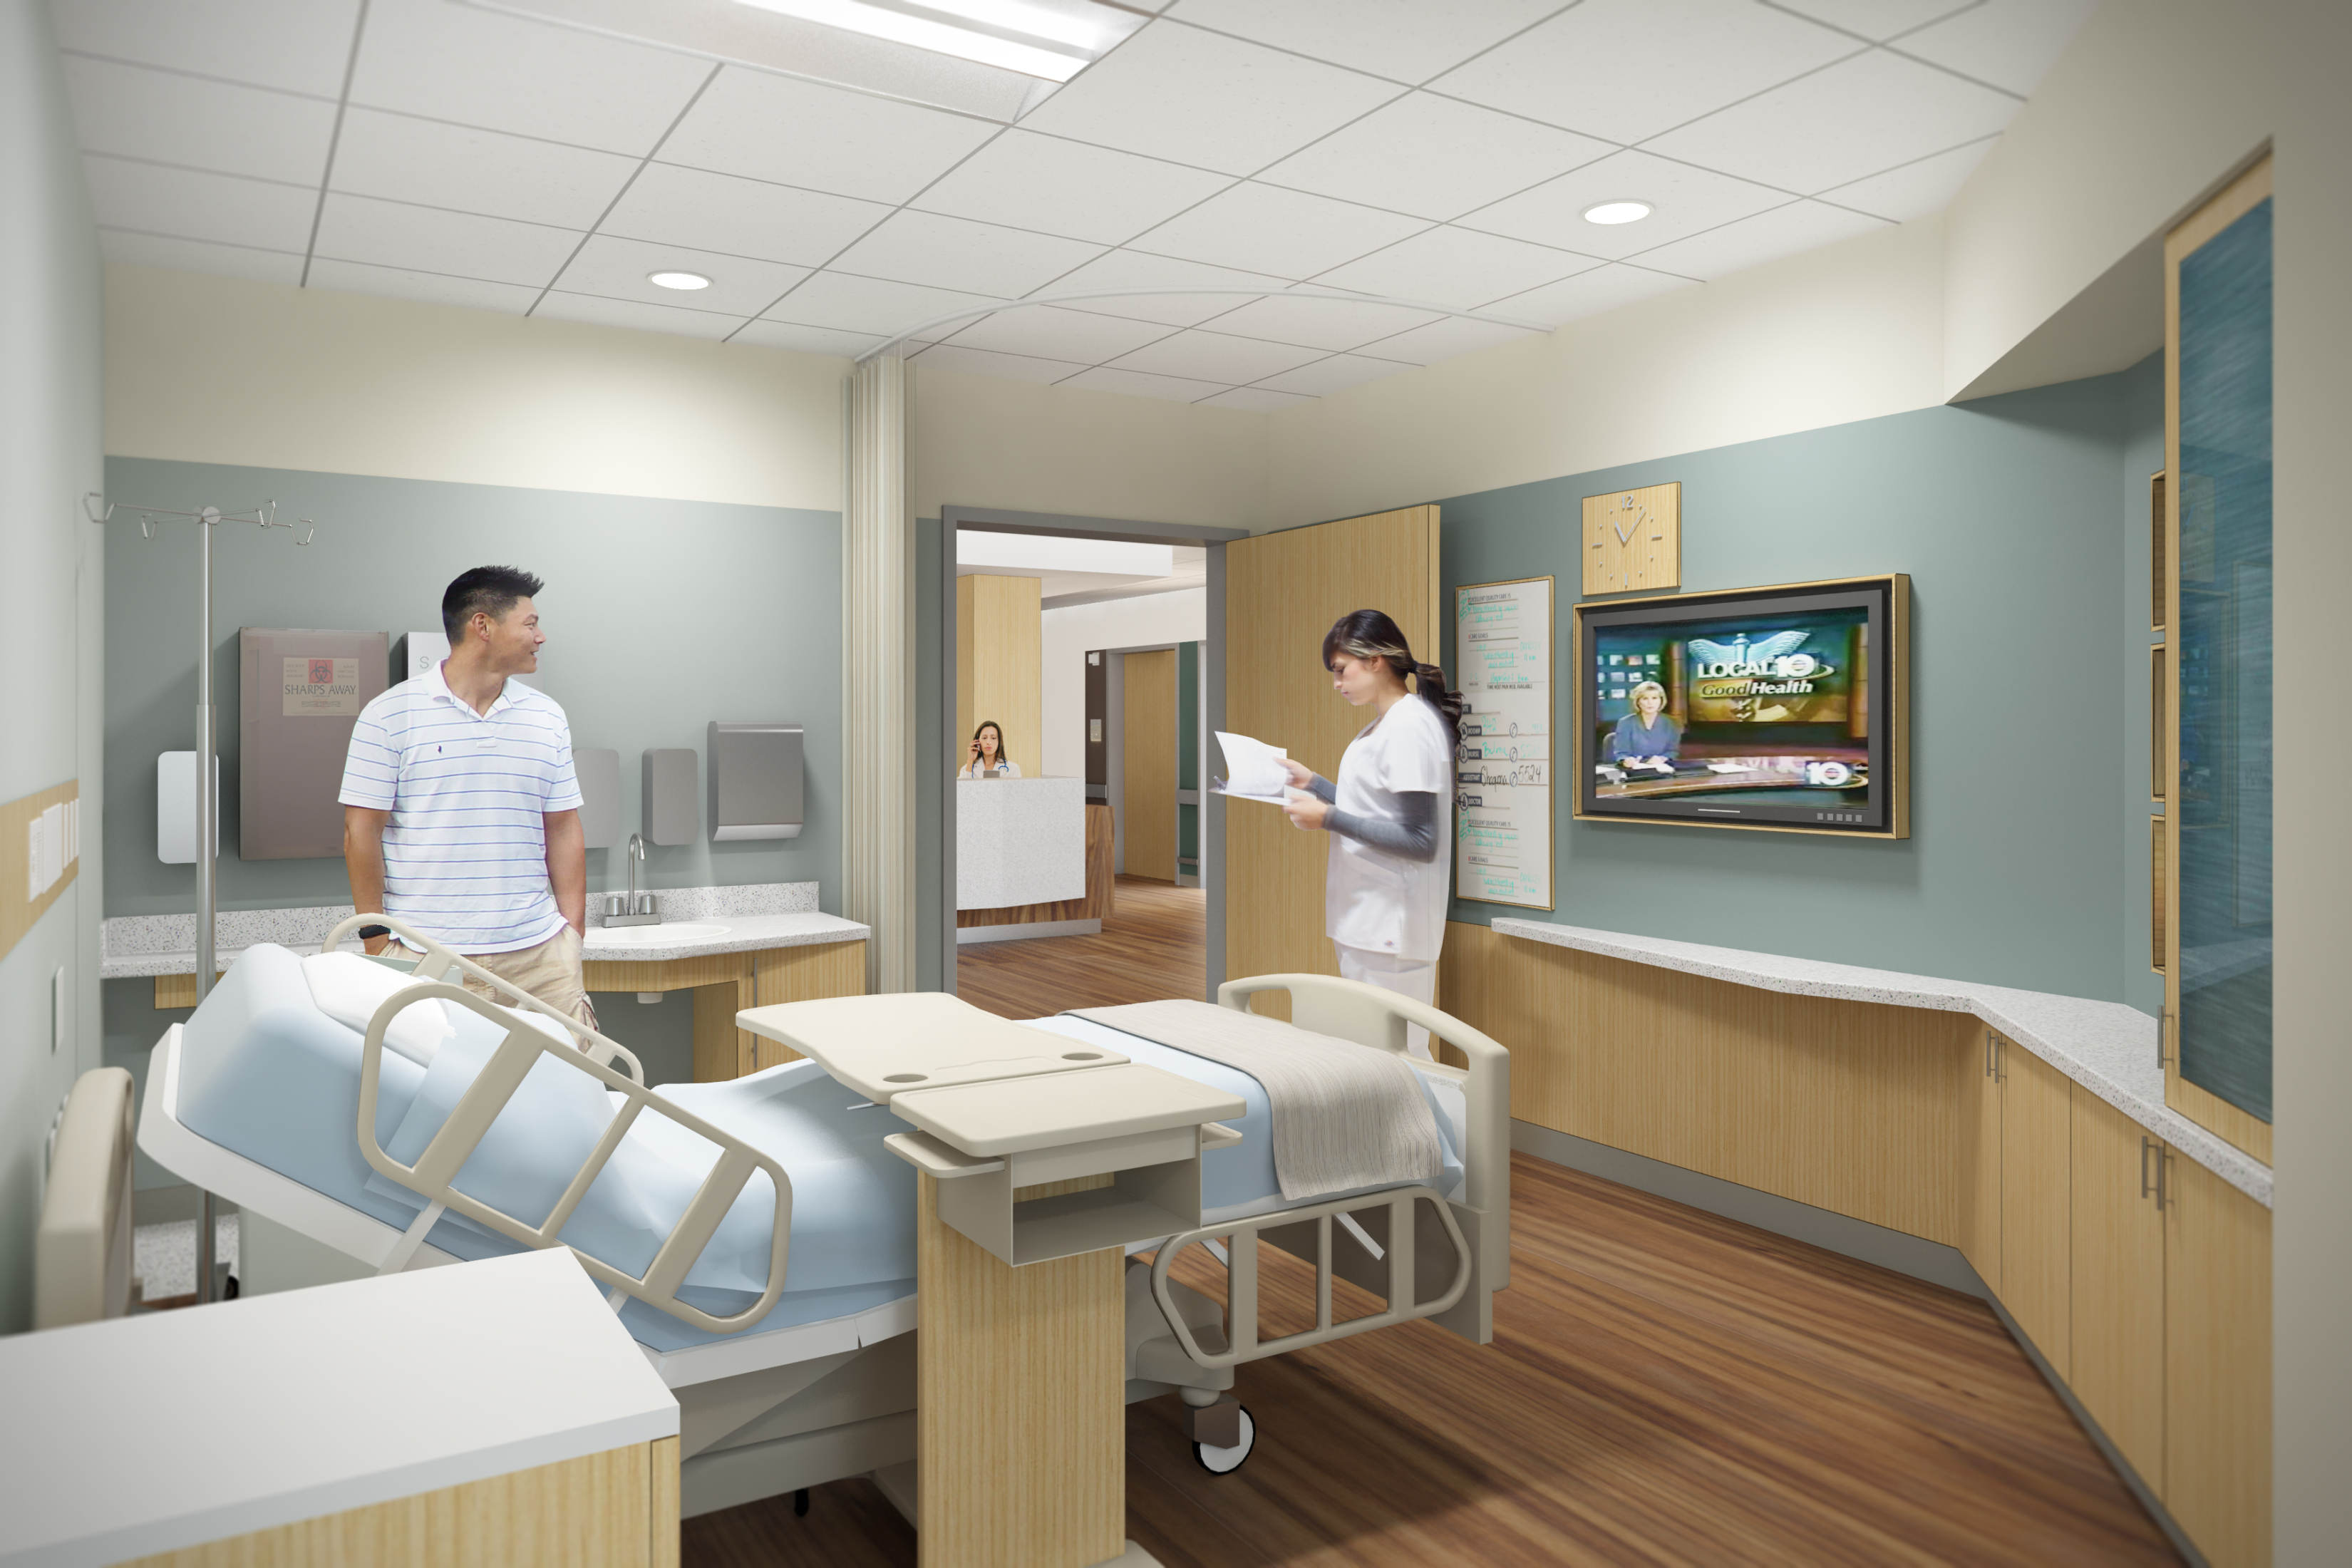 HMC Architects used hospital room design strategies in the Henry Mayo Newhall Hospital Patient Tower.